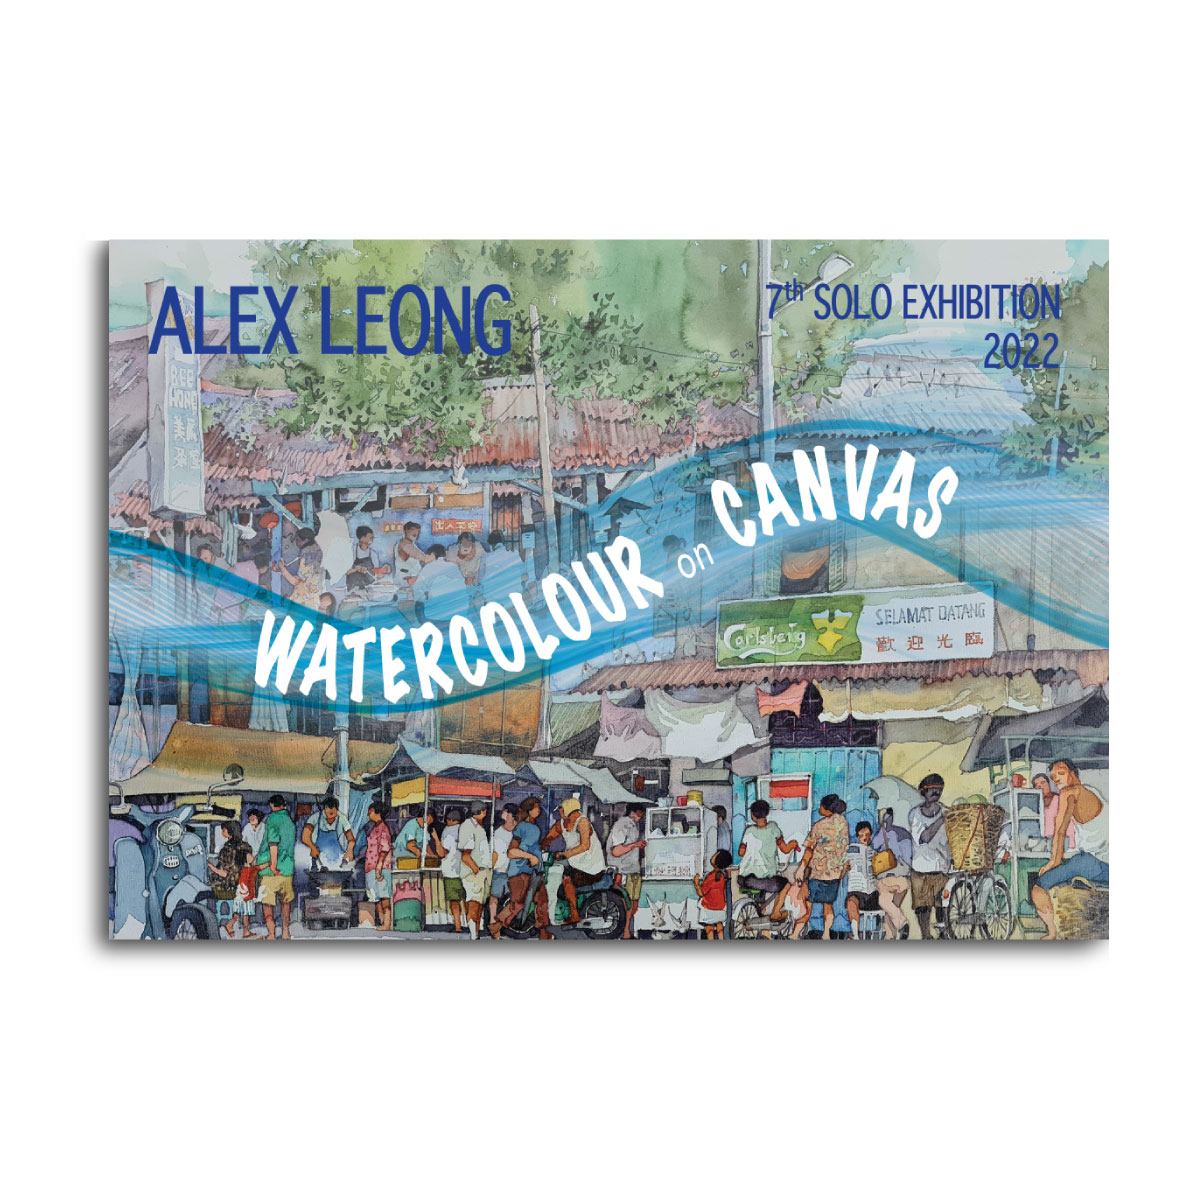 Watercolour on Canvas: 7th Solo Exhibition by Alex Leong